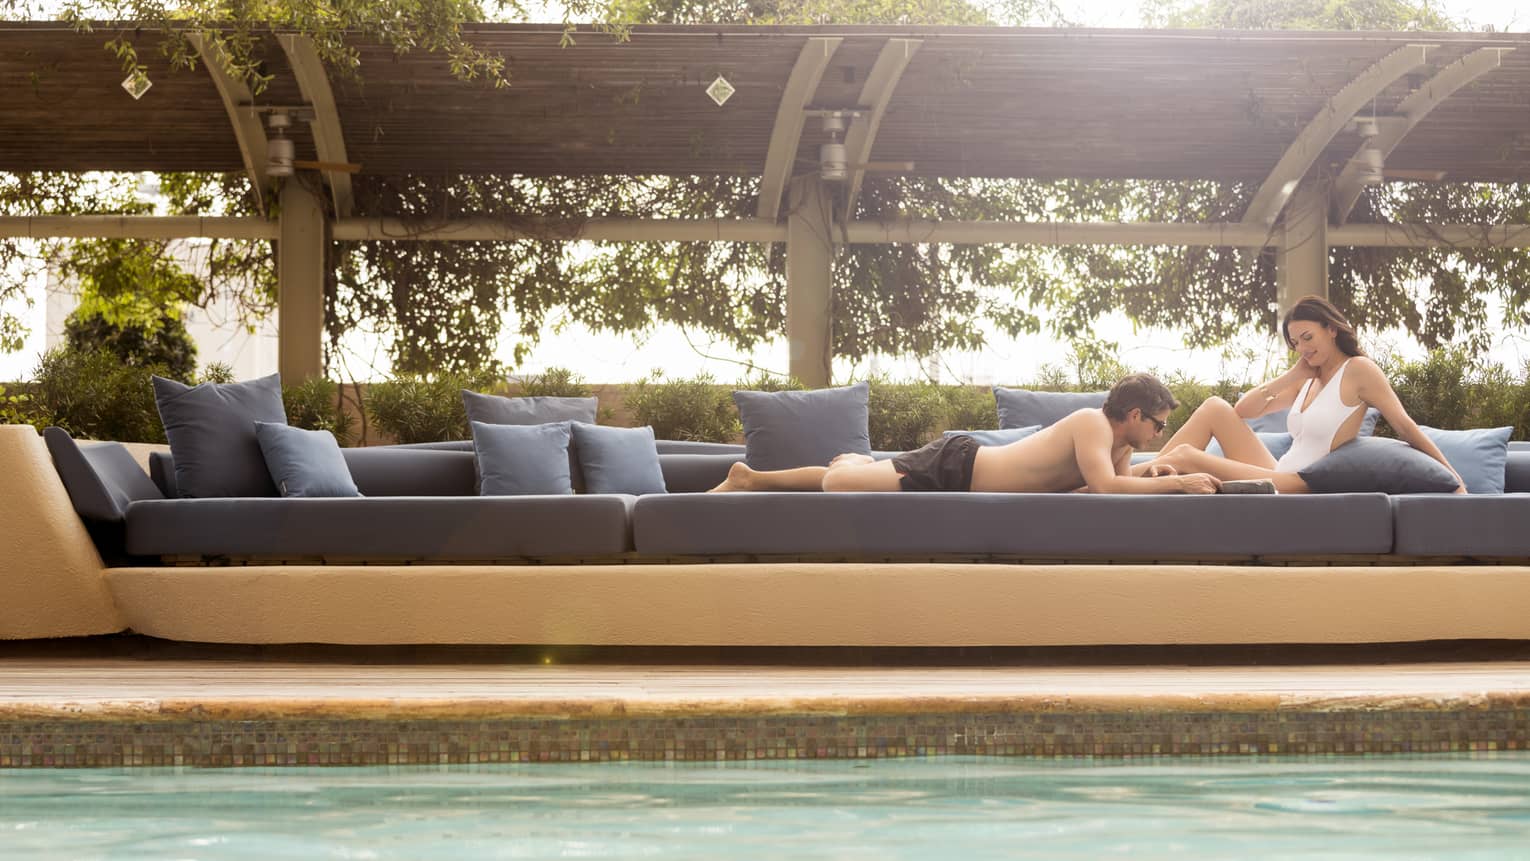 Man in swim trunks and woman in white swimsuit sunbathe on large blue patio banquette 